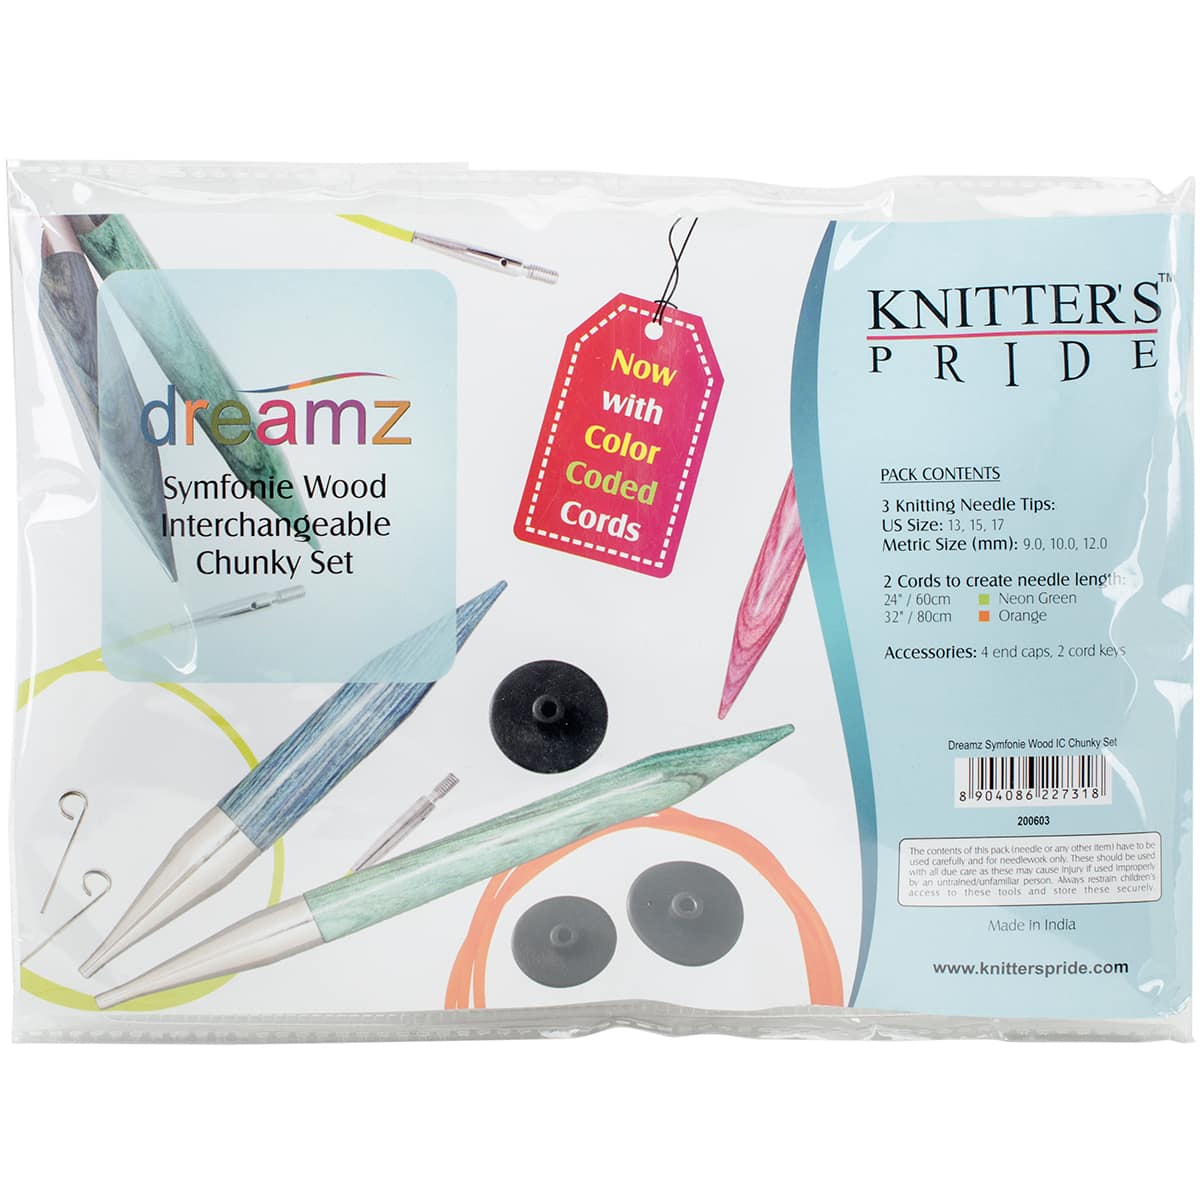 Knitters' Pride Dreamz Special Interchangeable 8 Needle Cord